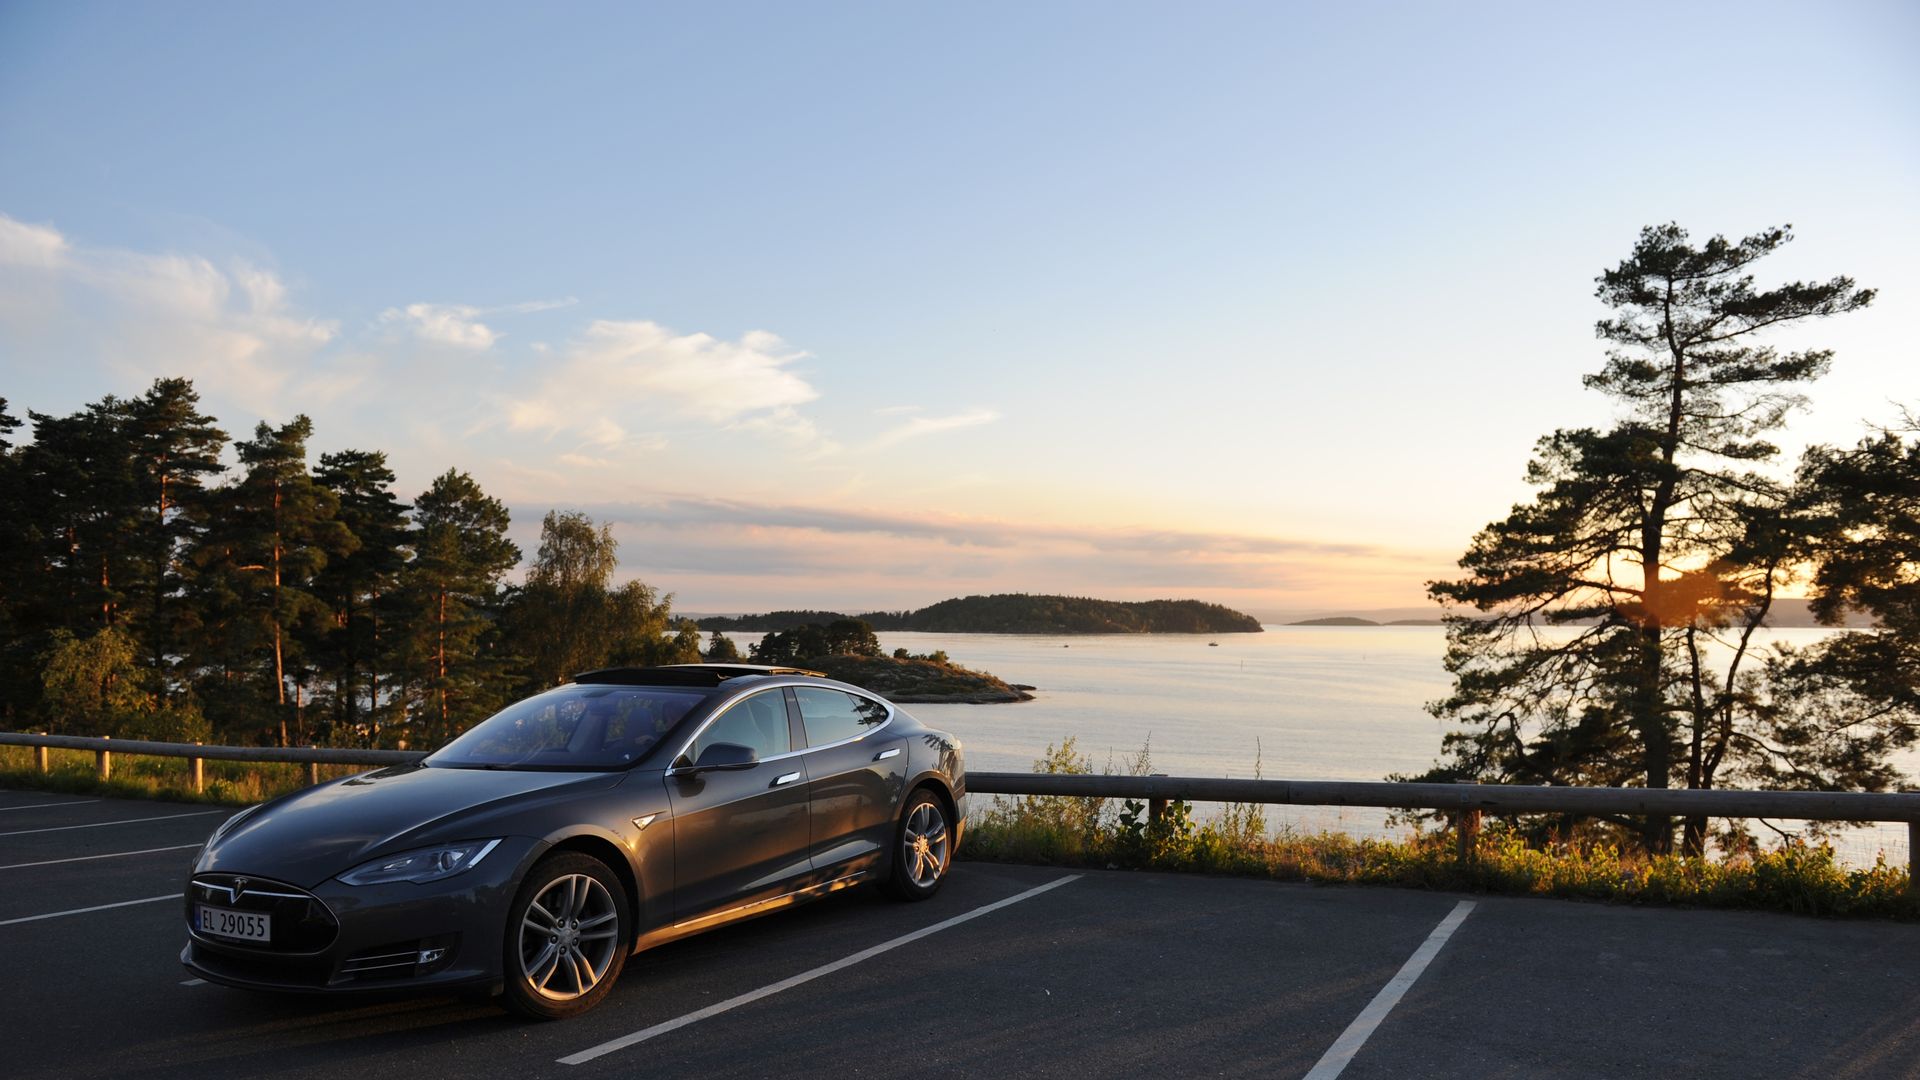 A Tesla electric car is parked at the coast of Son, South of Oslo, Norway, 03 August 2015.